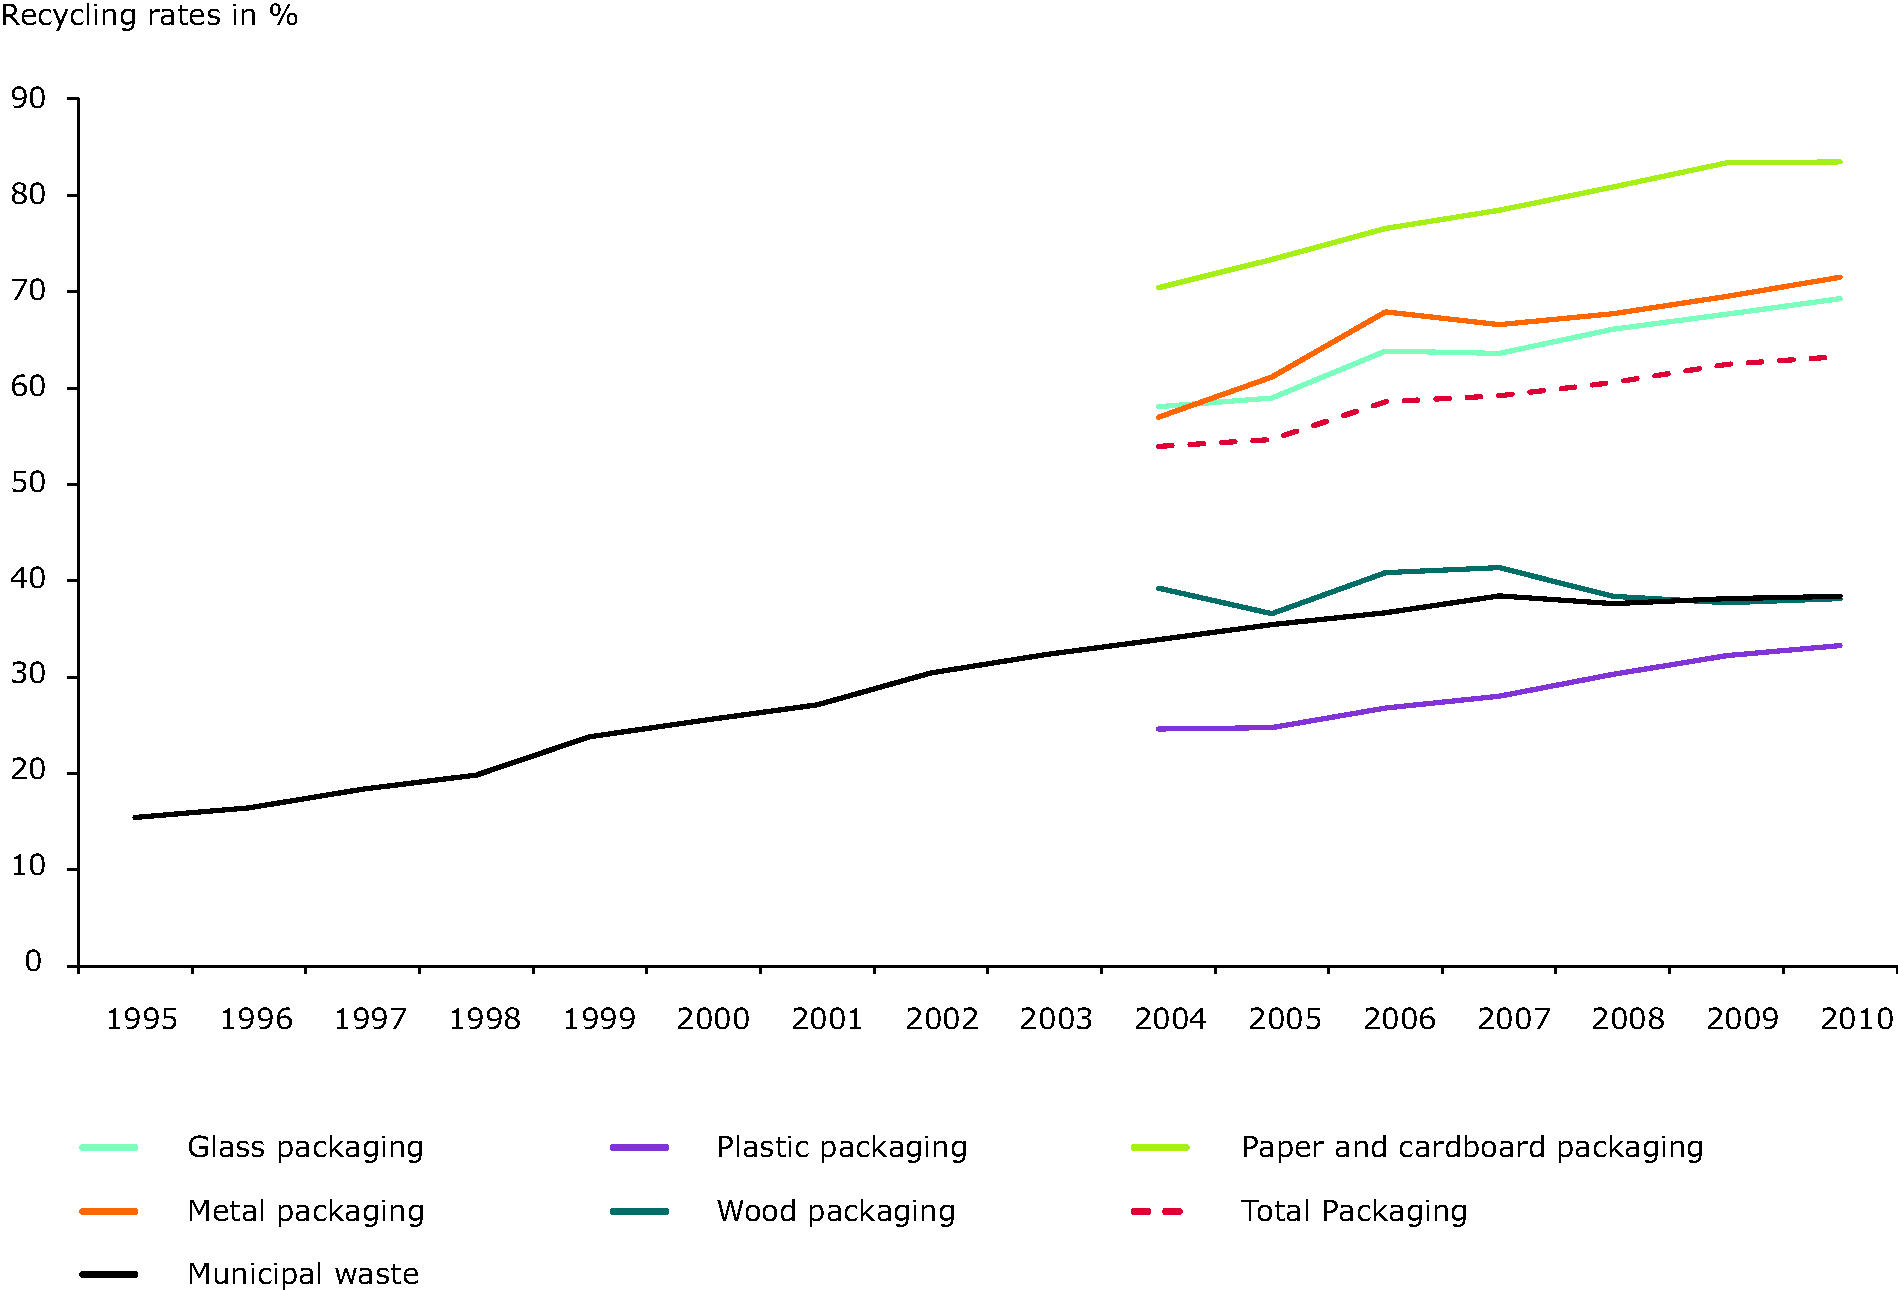 Recycling rates for key materials and for total municipal and packaging waste, EU-27 